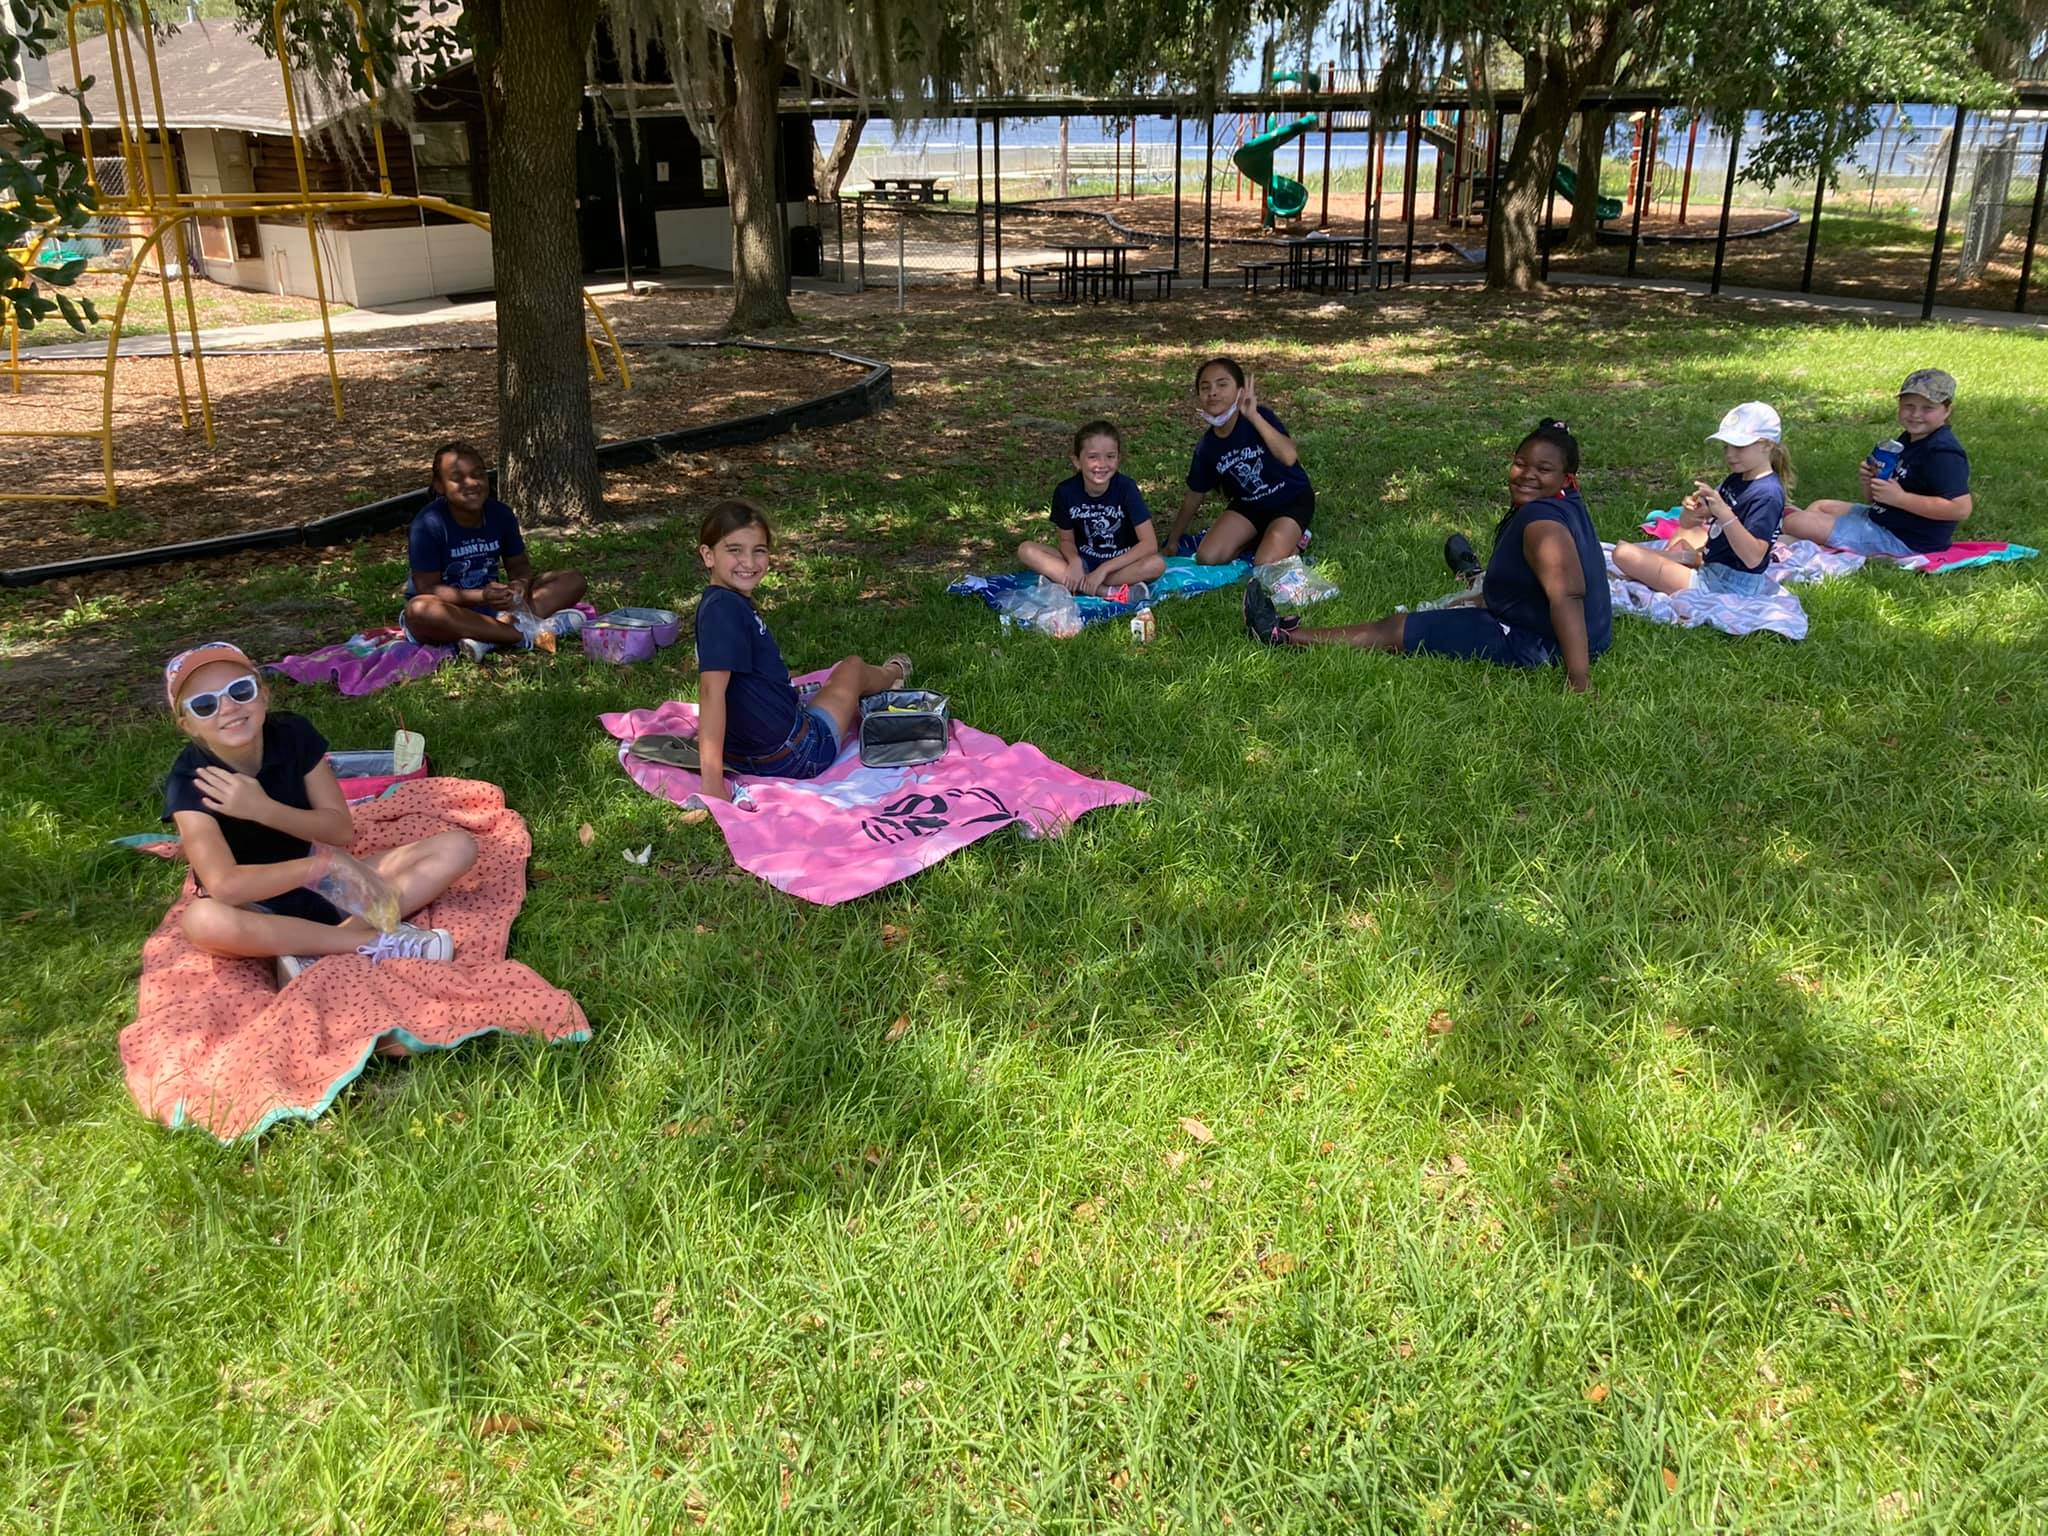 Students enjoying their picnic lunch.